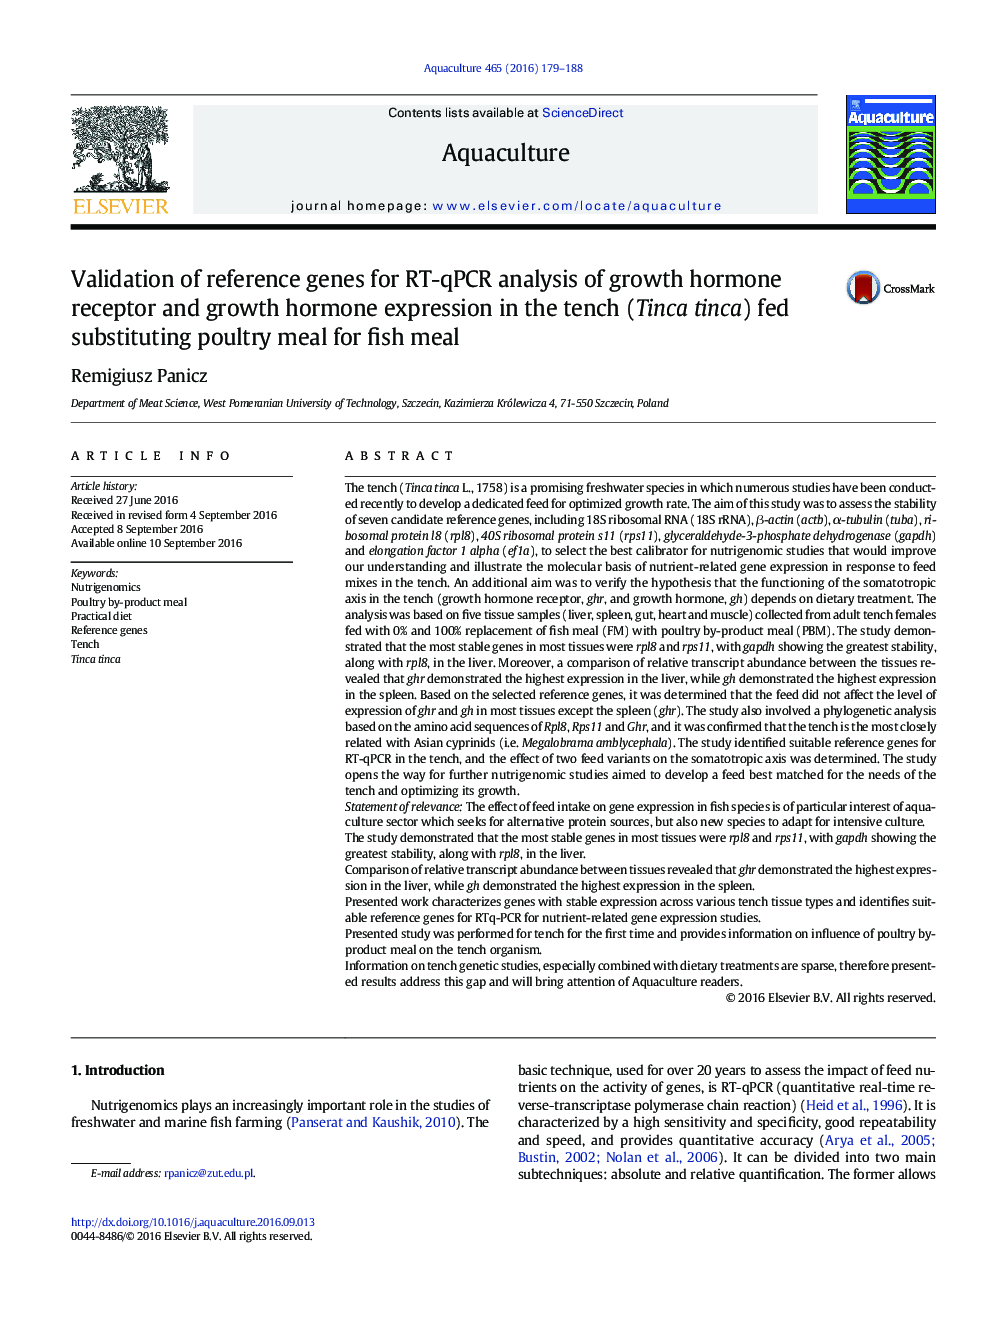 Validation of reference genes for RT-qPCR analysis of growth hormone receptor and growth hormone expression in the tench (Tinca tinca) fed substituting poultry meal for fish meal